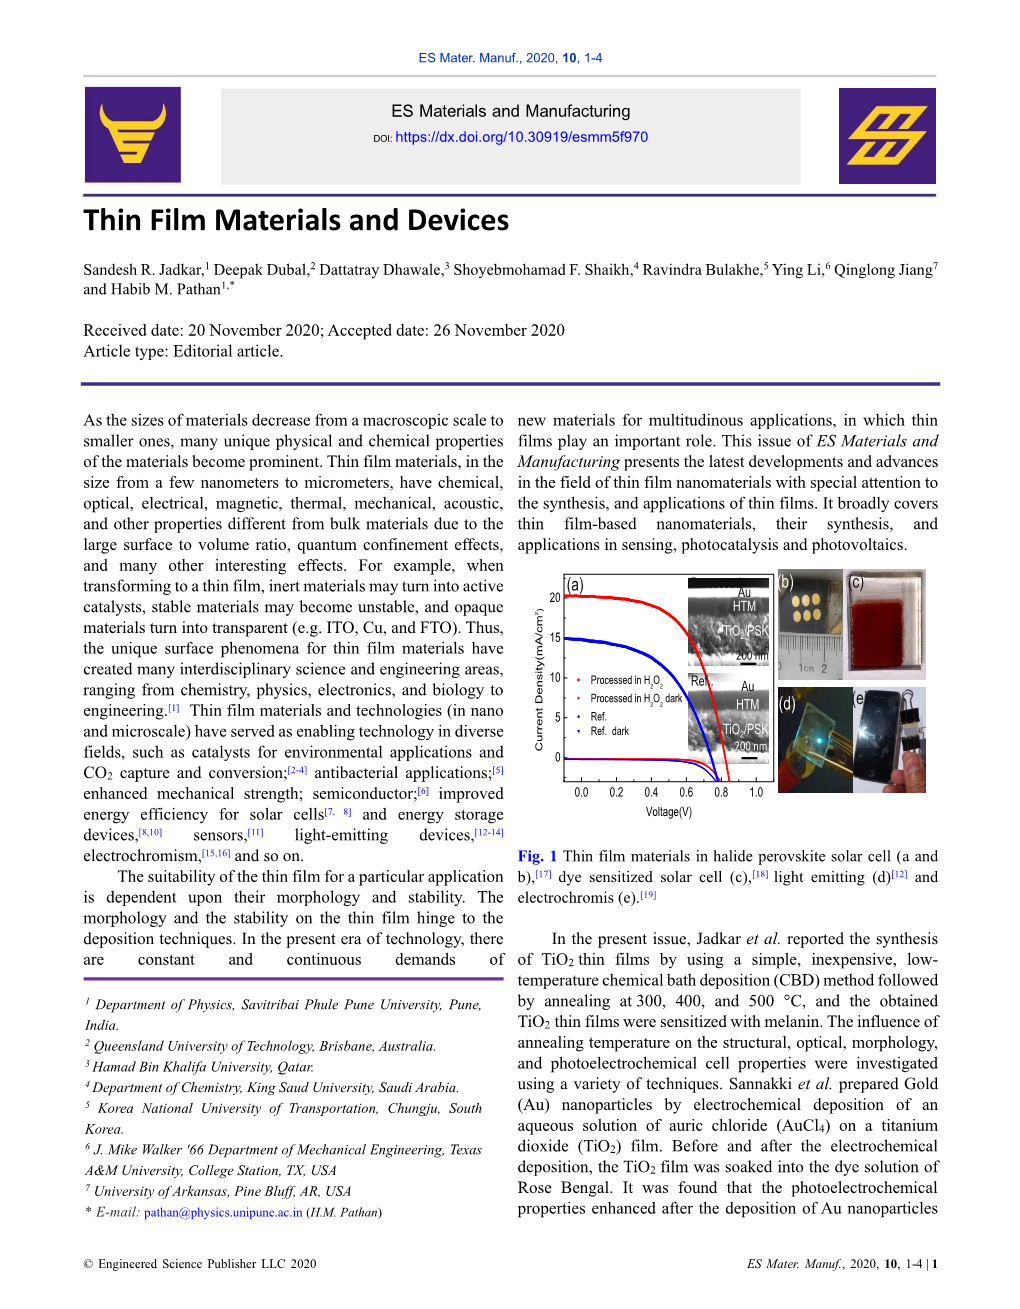 Thin Film Materials and Devices